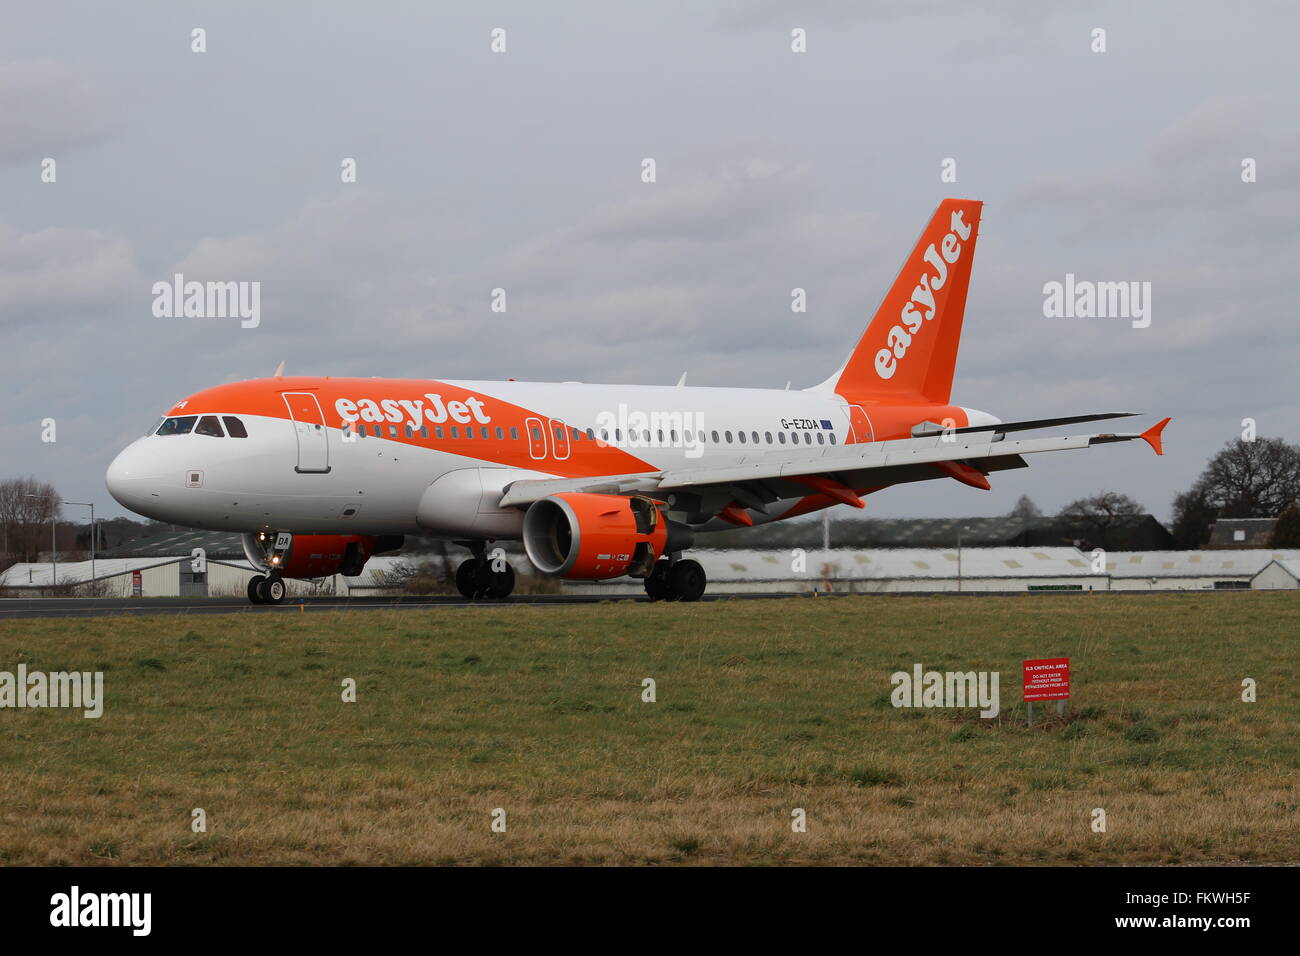 Easyjet at London southend airport Stock Photo